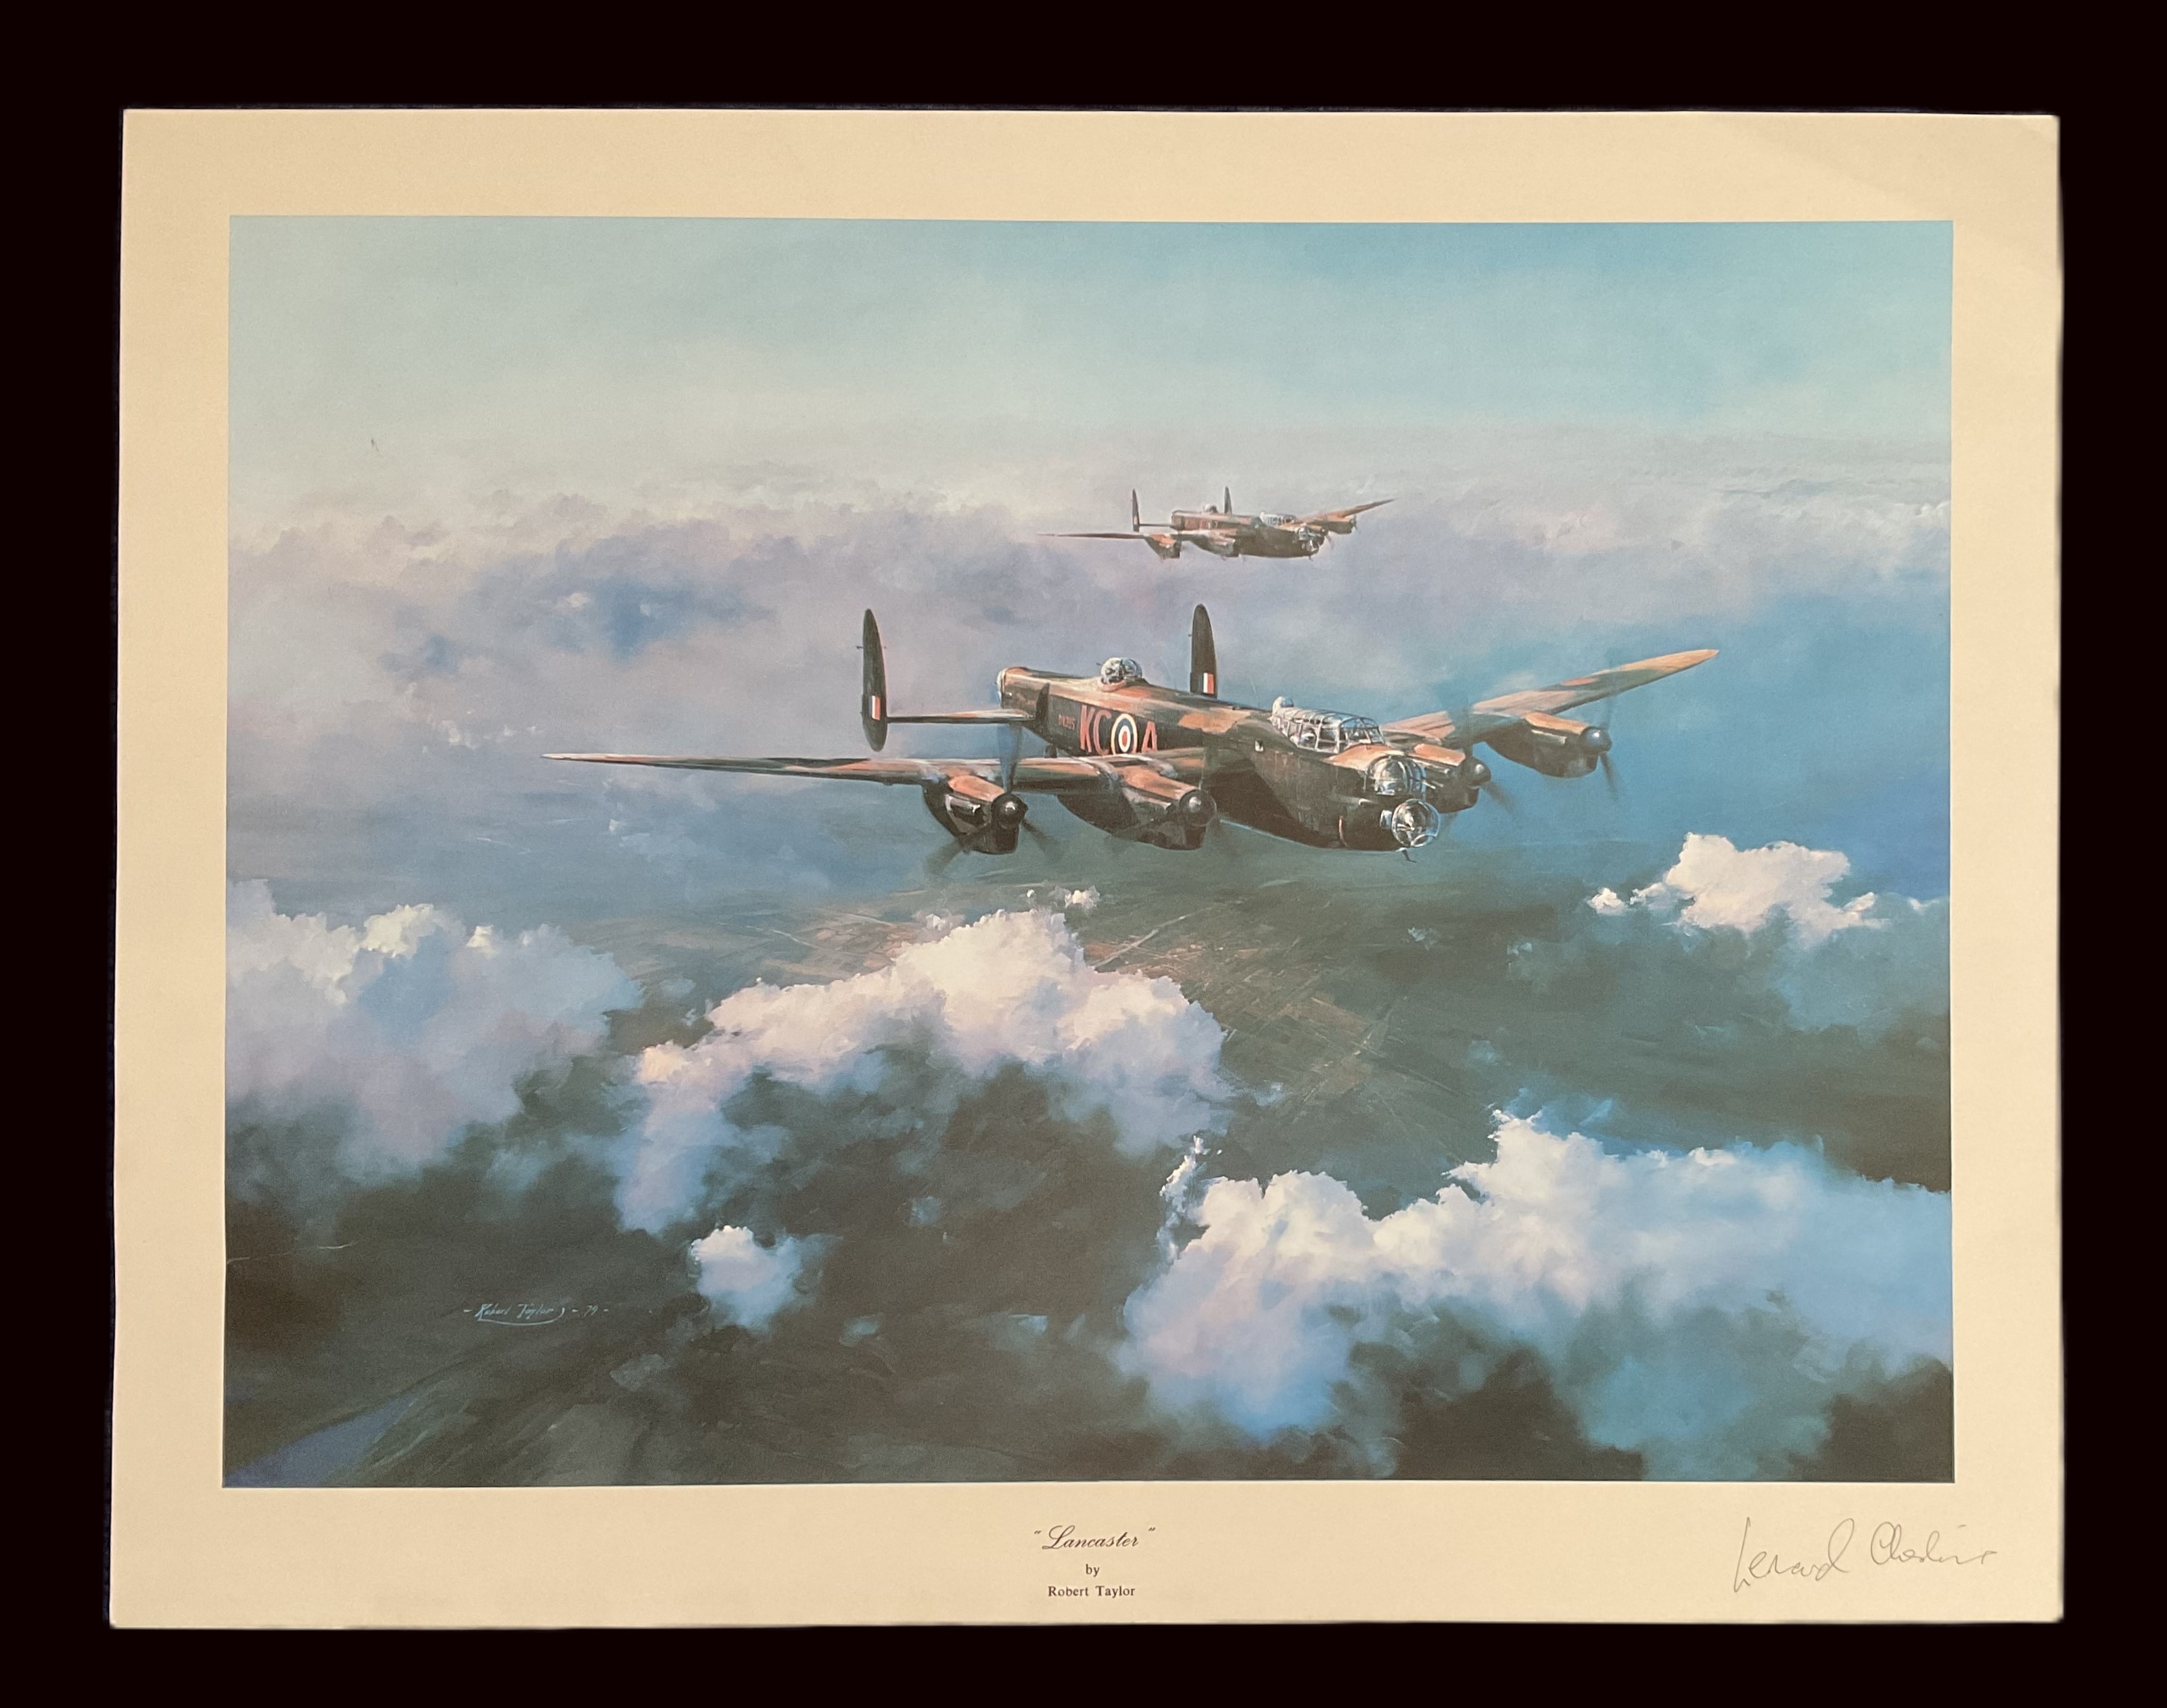 Lancaster by Robert Taylor Colour Print signed by the Artist plus Leonard Cheshire, approx sizes